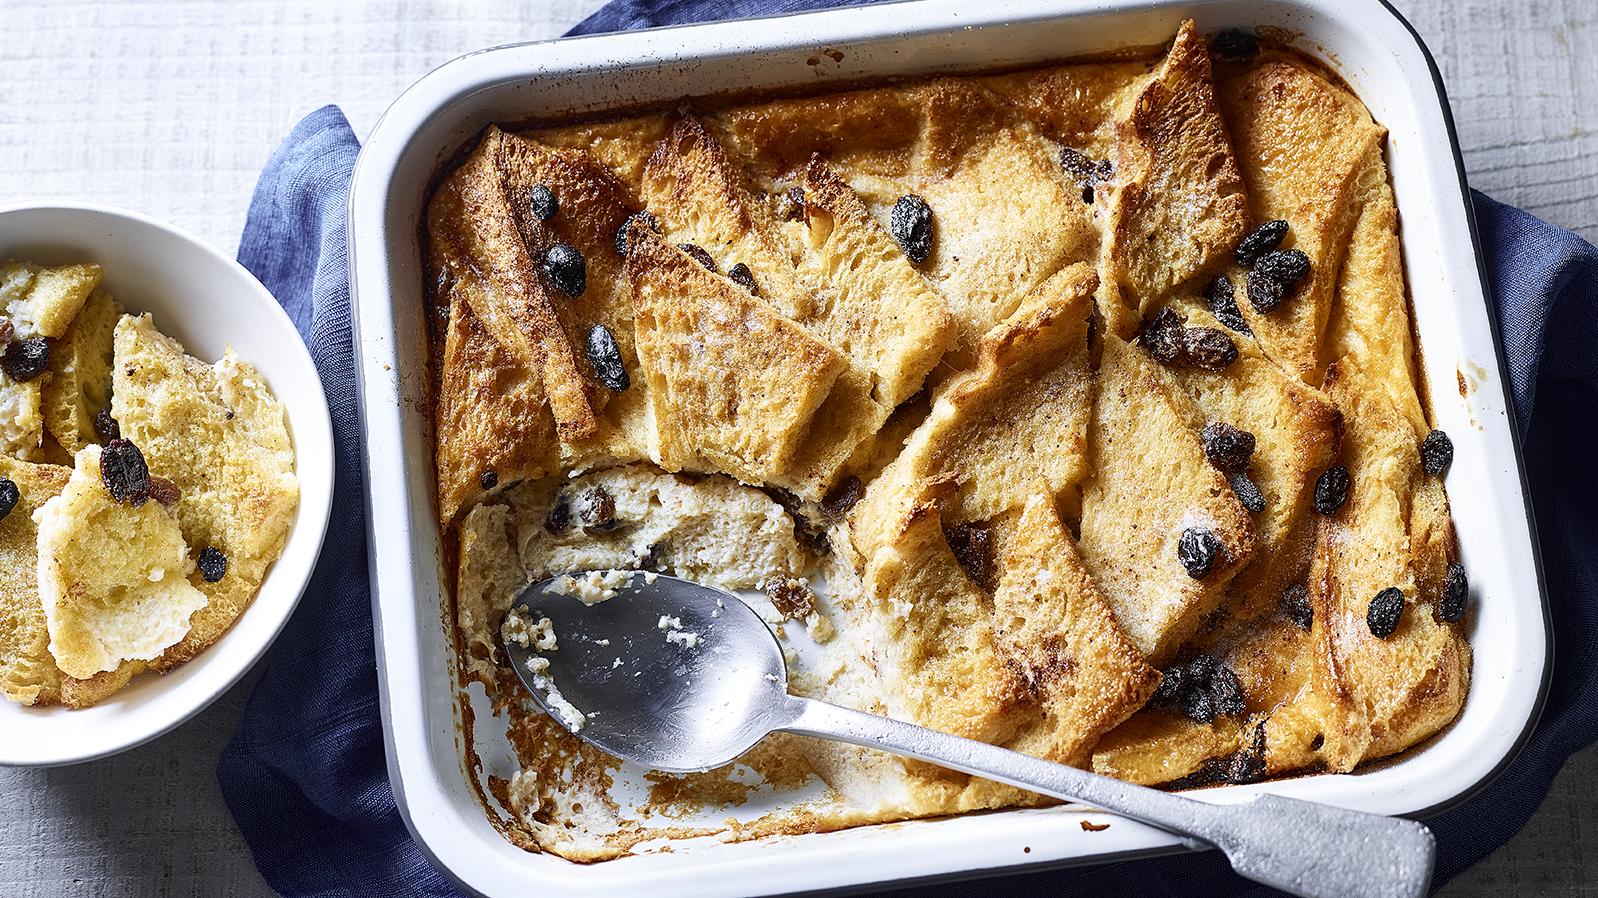  Let the aroma of this classic British dessert take you on a journey down memory lane.